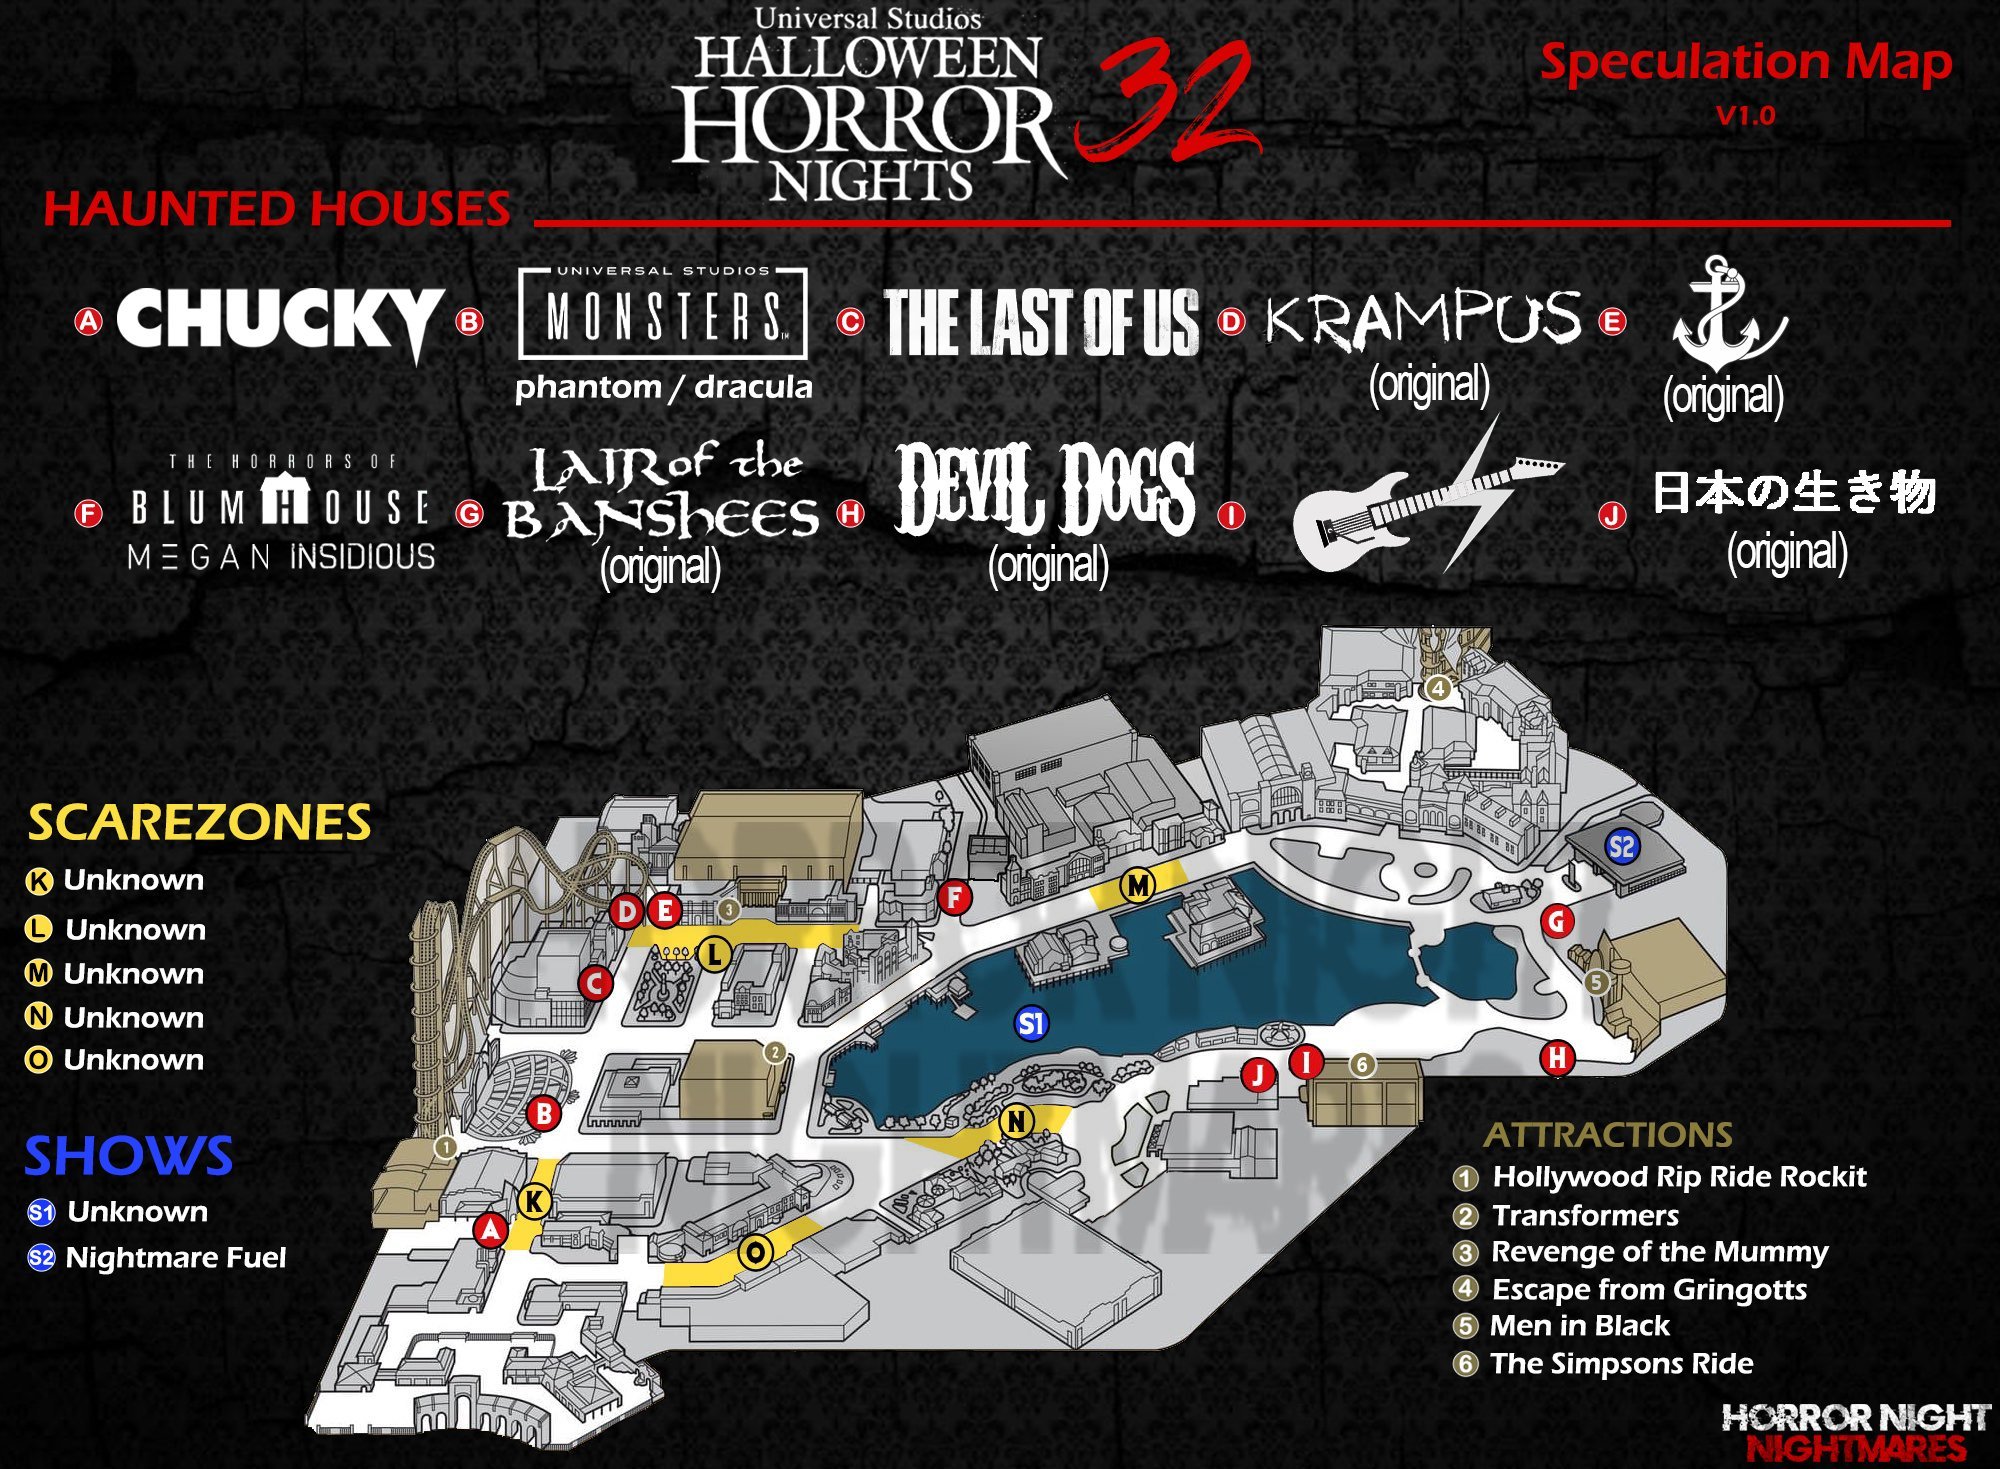 Halloween Horror Nights 2023 Speculation Map Arrives! — The Drop Network